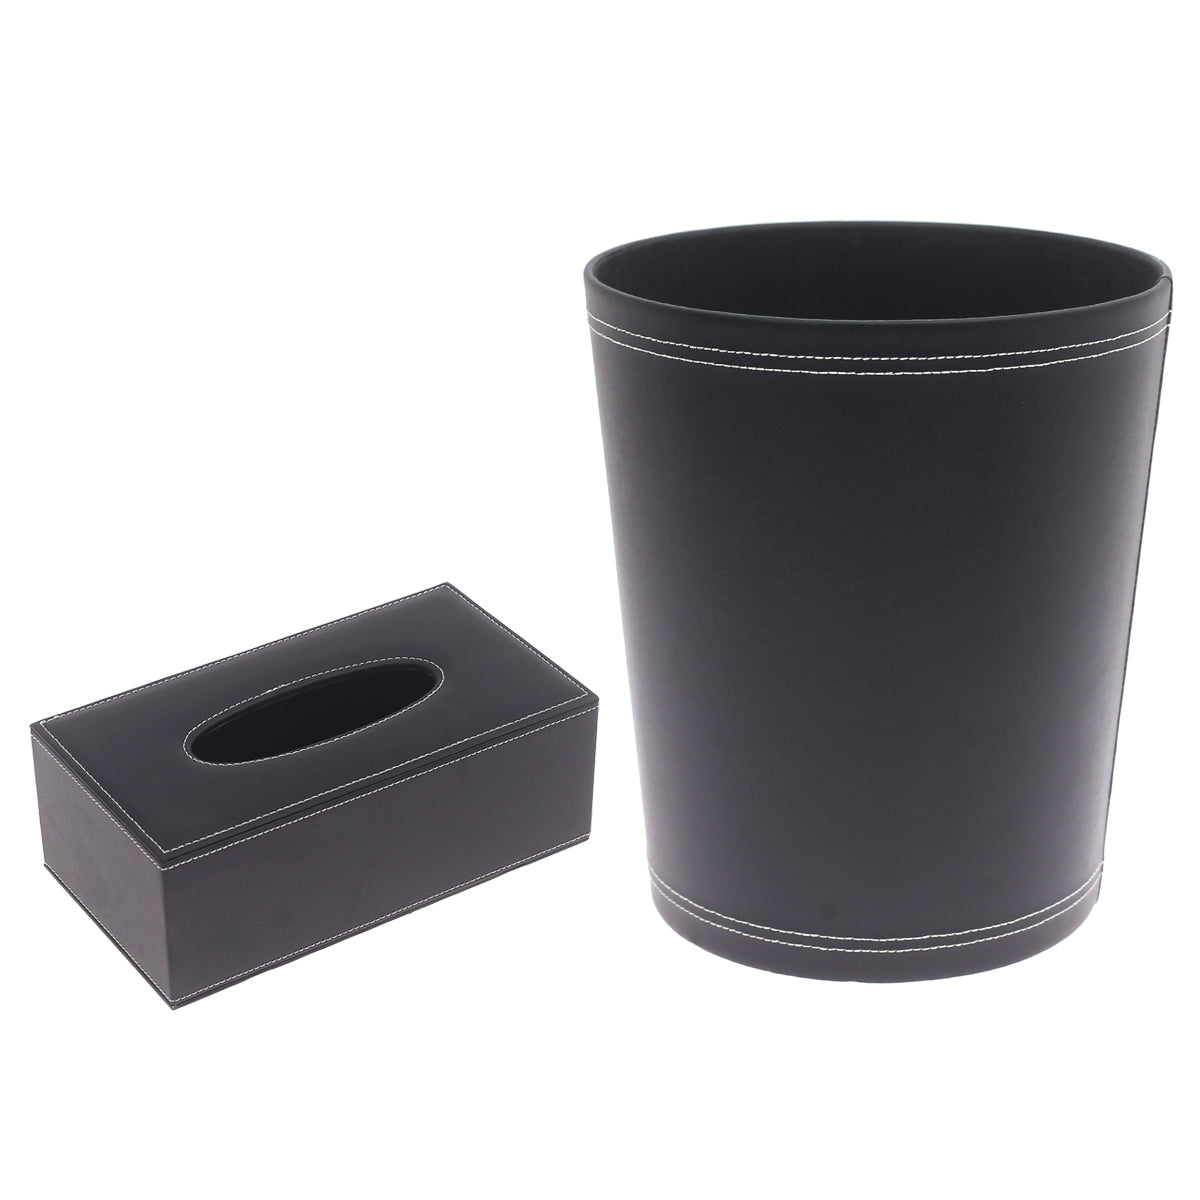 Dustbin With Tissue Box Leather Black